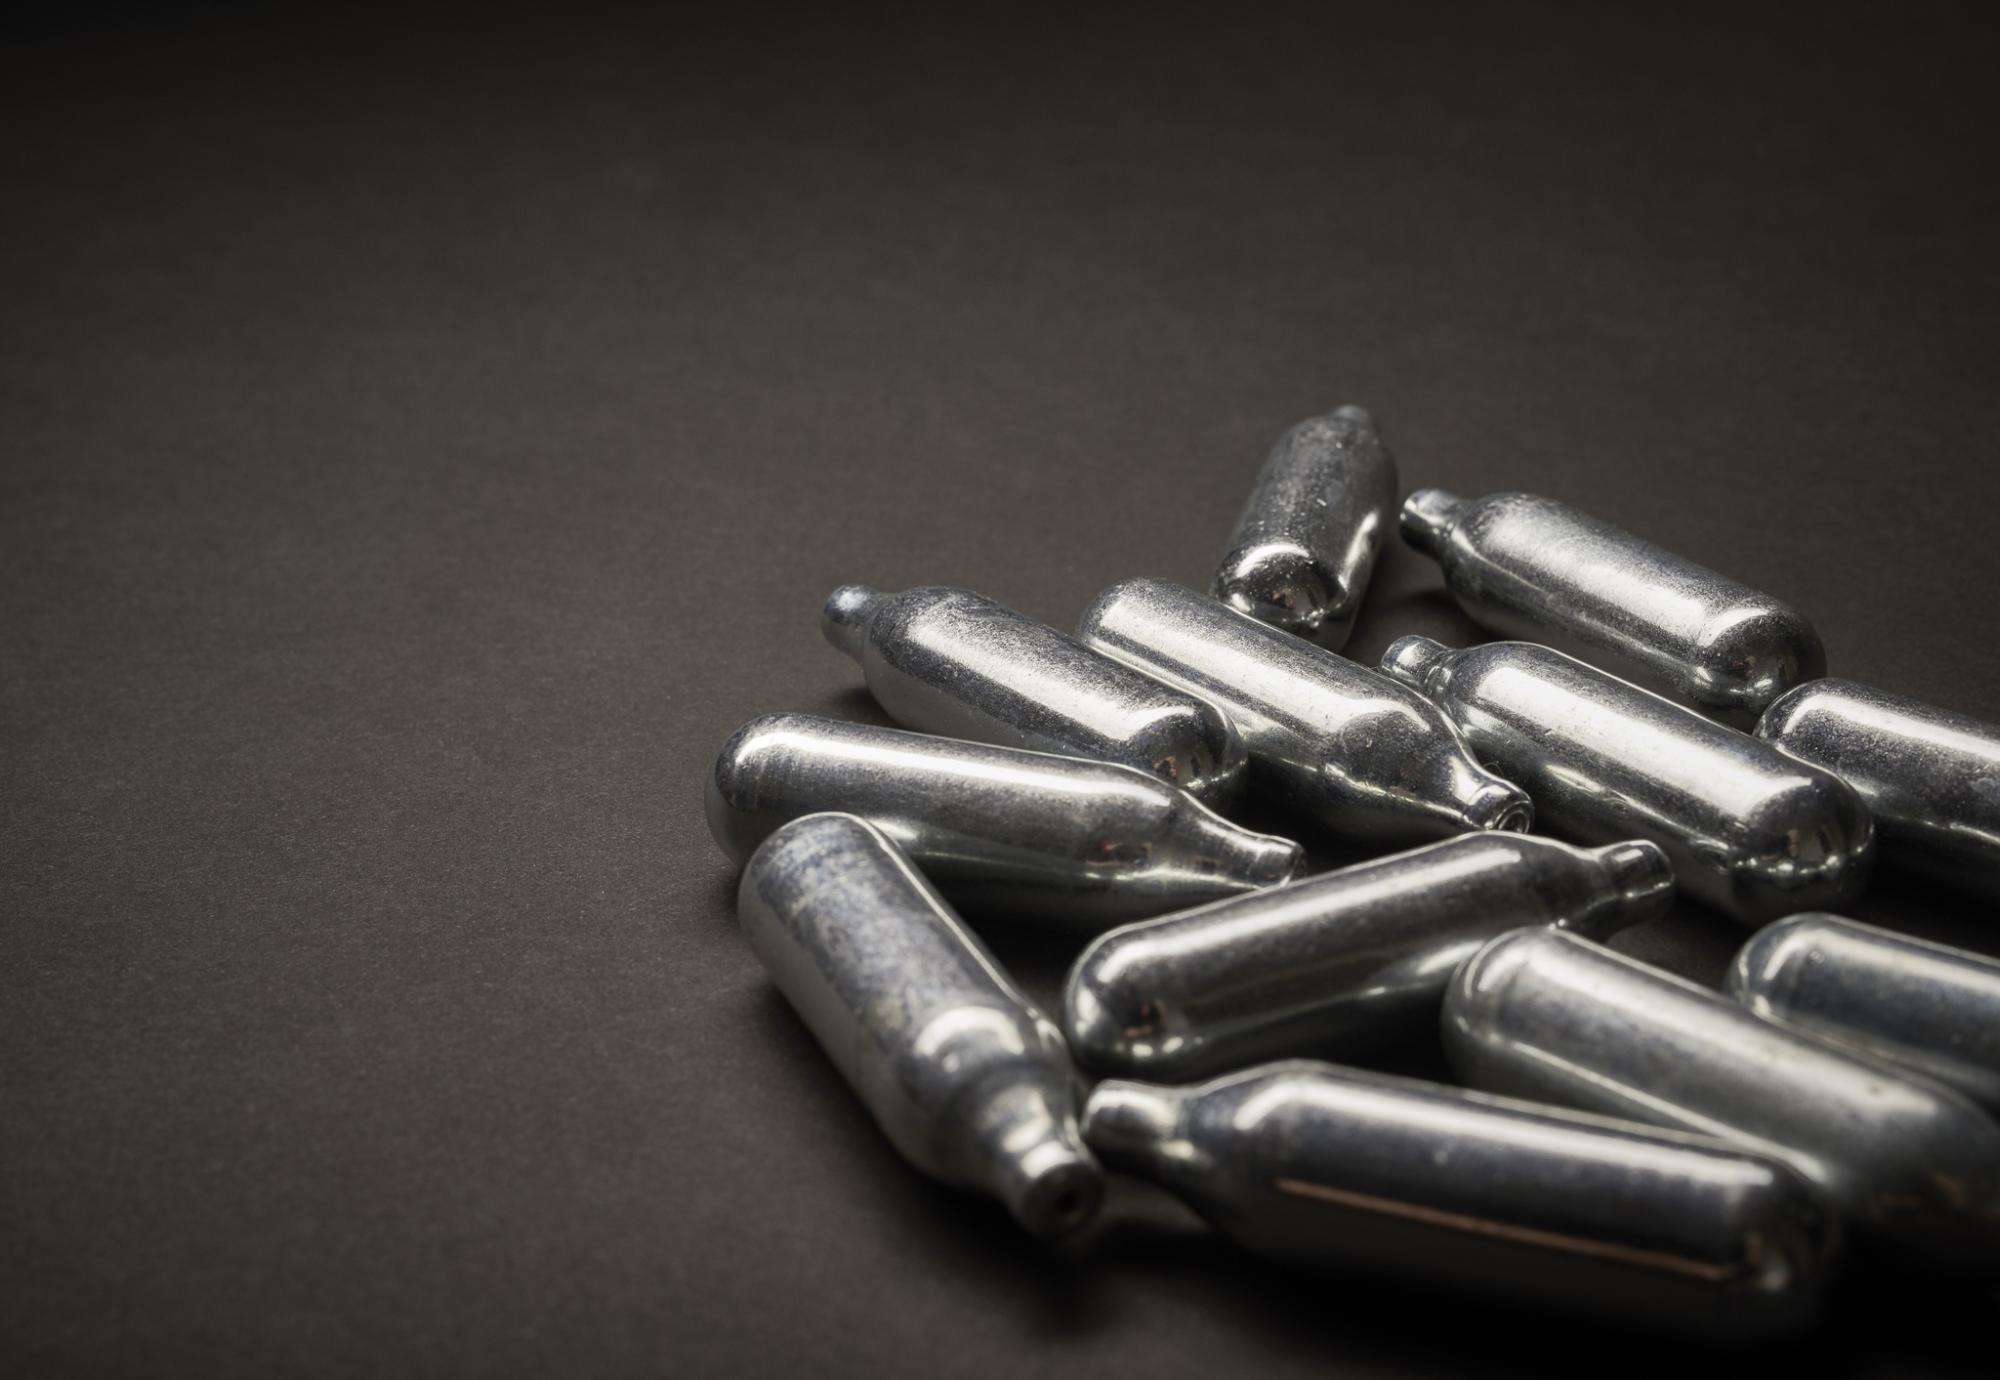 Nitrous oxide canisters on the ground